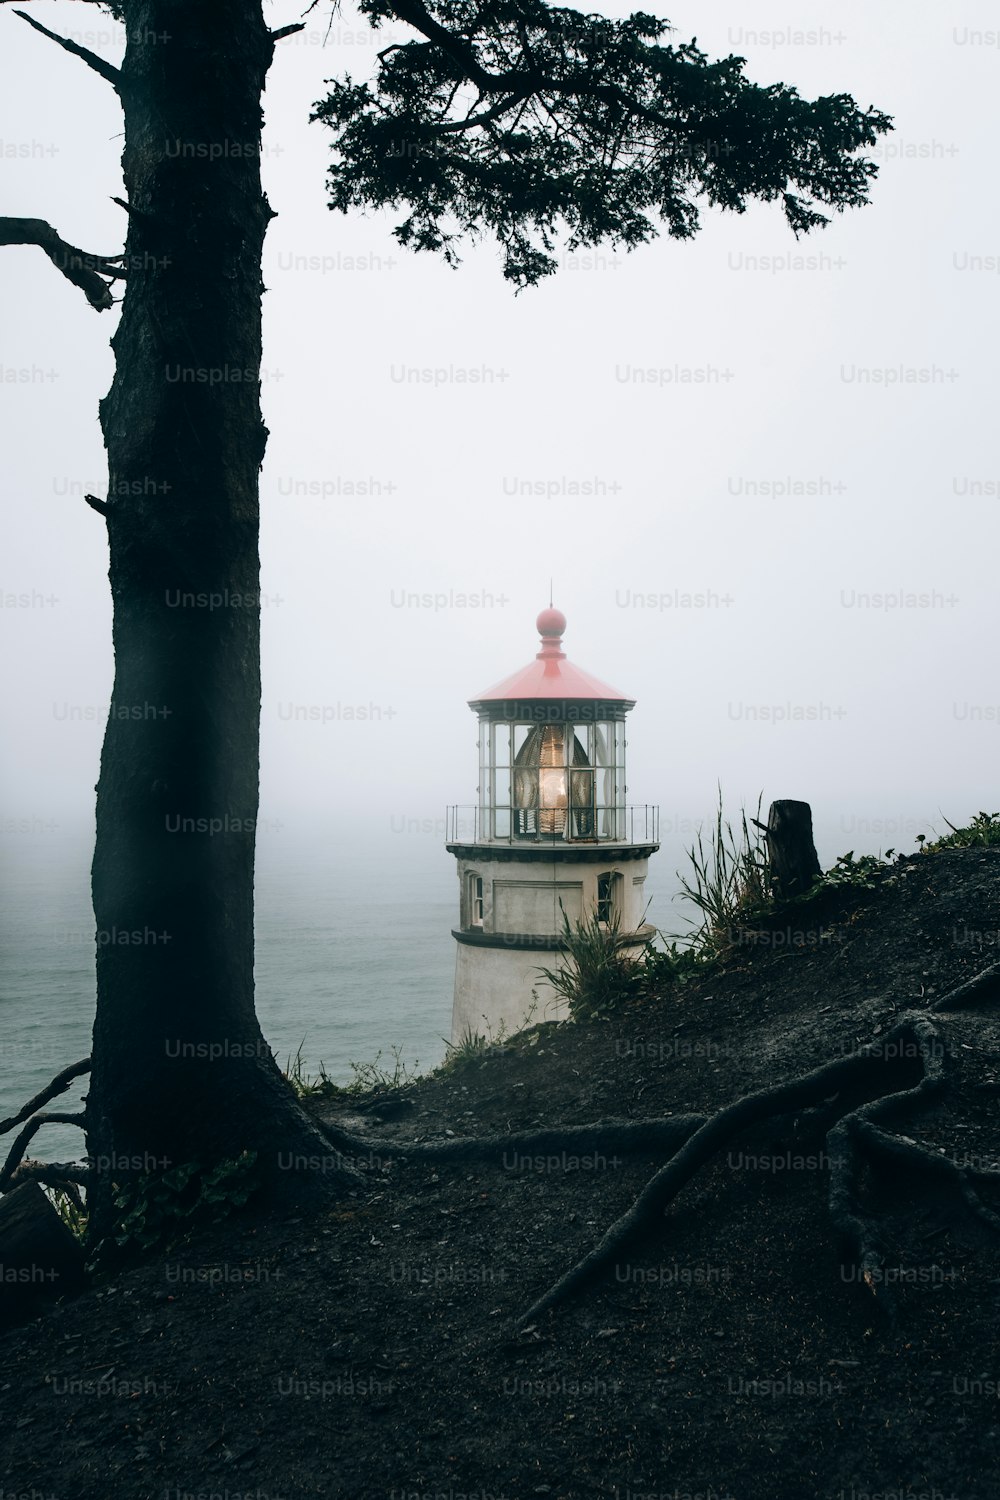 a light house sitting on top of a hill next to a tree